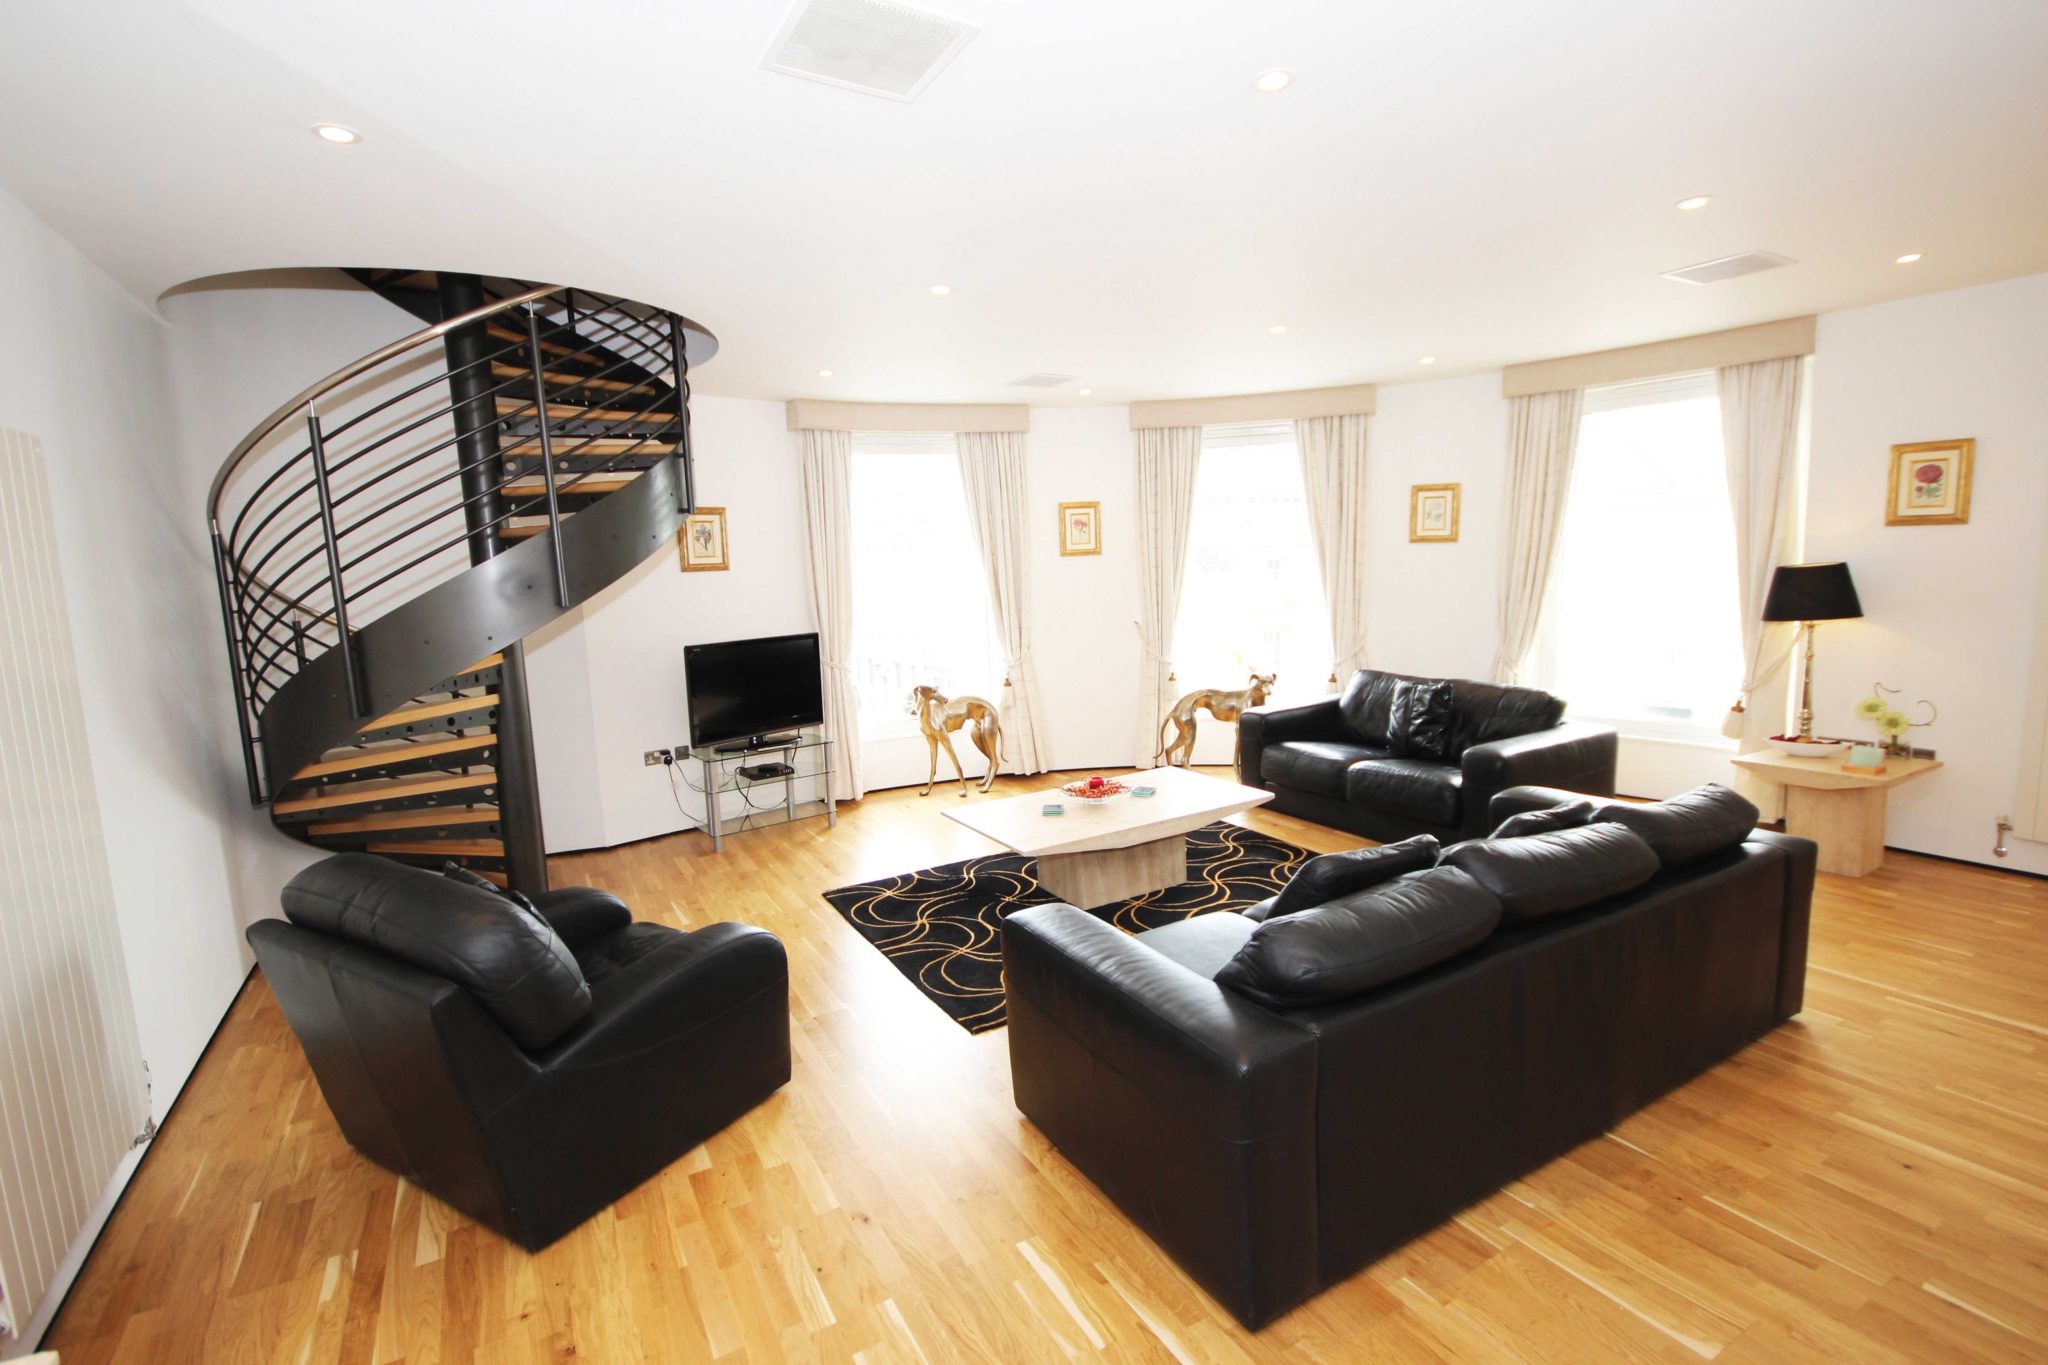 Newcastle Short Let Apartments UK available Now! Book Corporate Serviced Accommodation in North East England today! Parking,Wifi, 5* Service, All bills incl | Urban Stay